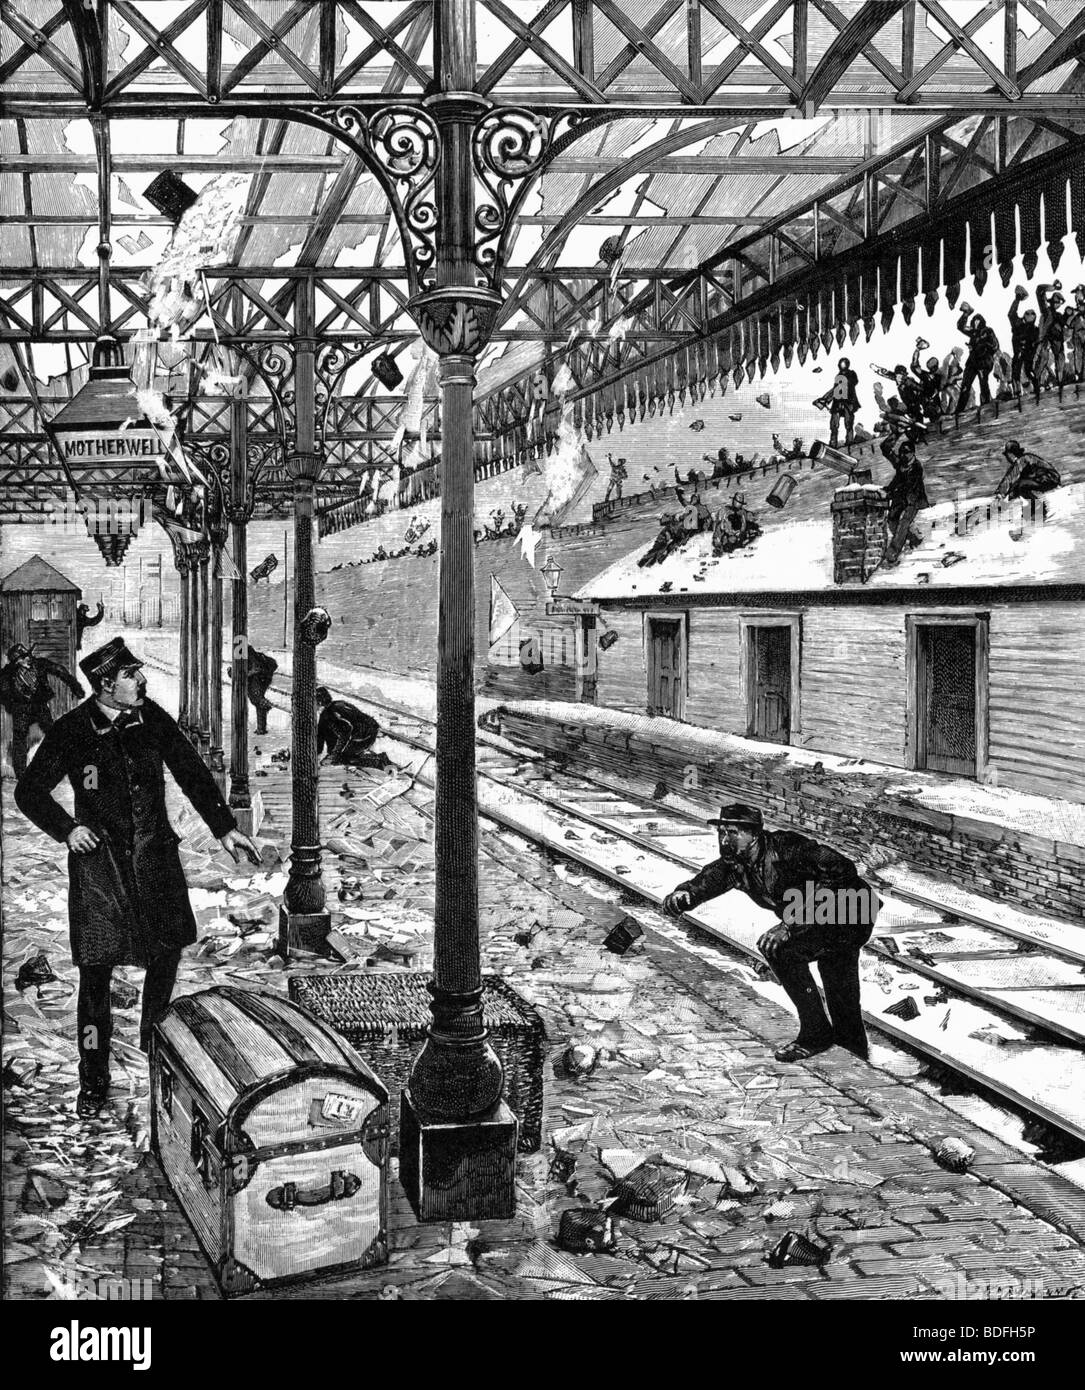 SCOTTISH RAIL STRIKE 1891 -railway workers protesting at Motherwell Station Stock Photo